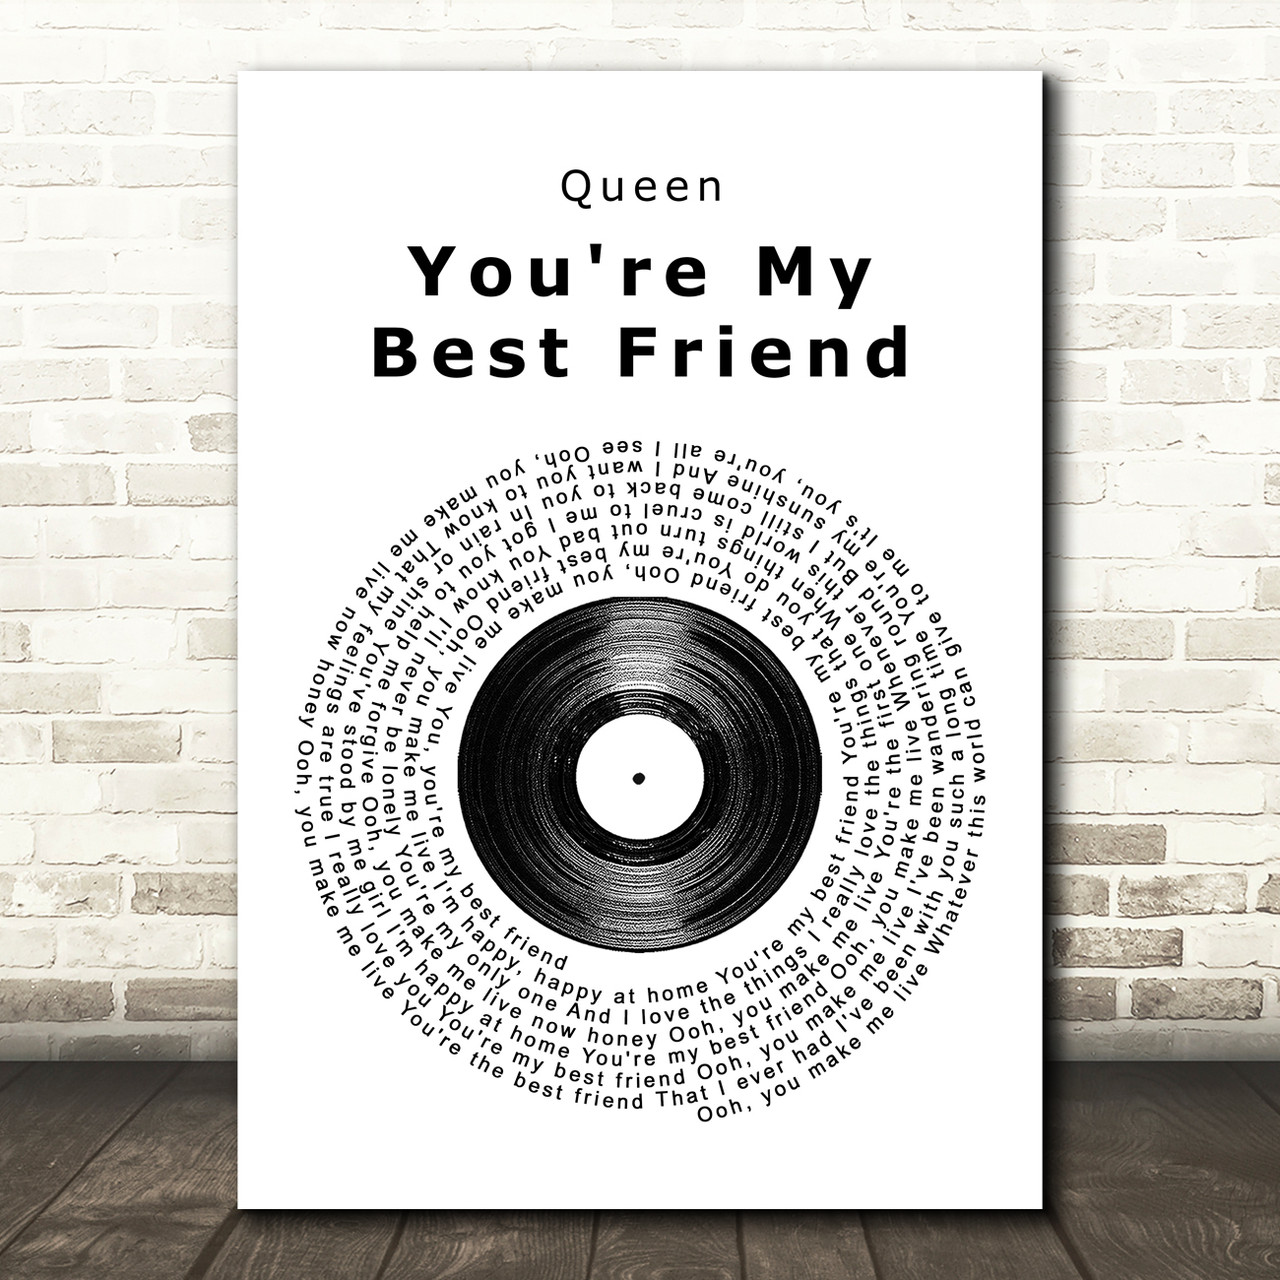 You're My Best Friend': The Story Behind The Queen Song